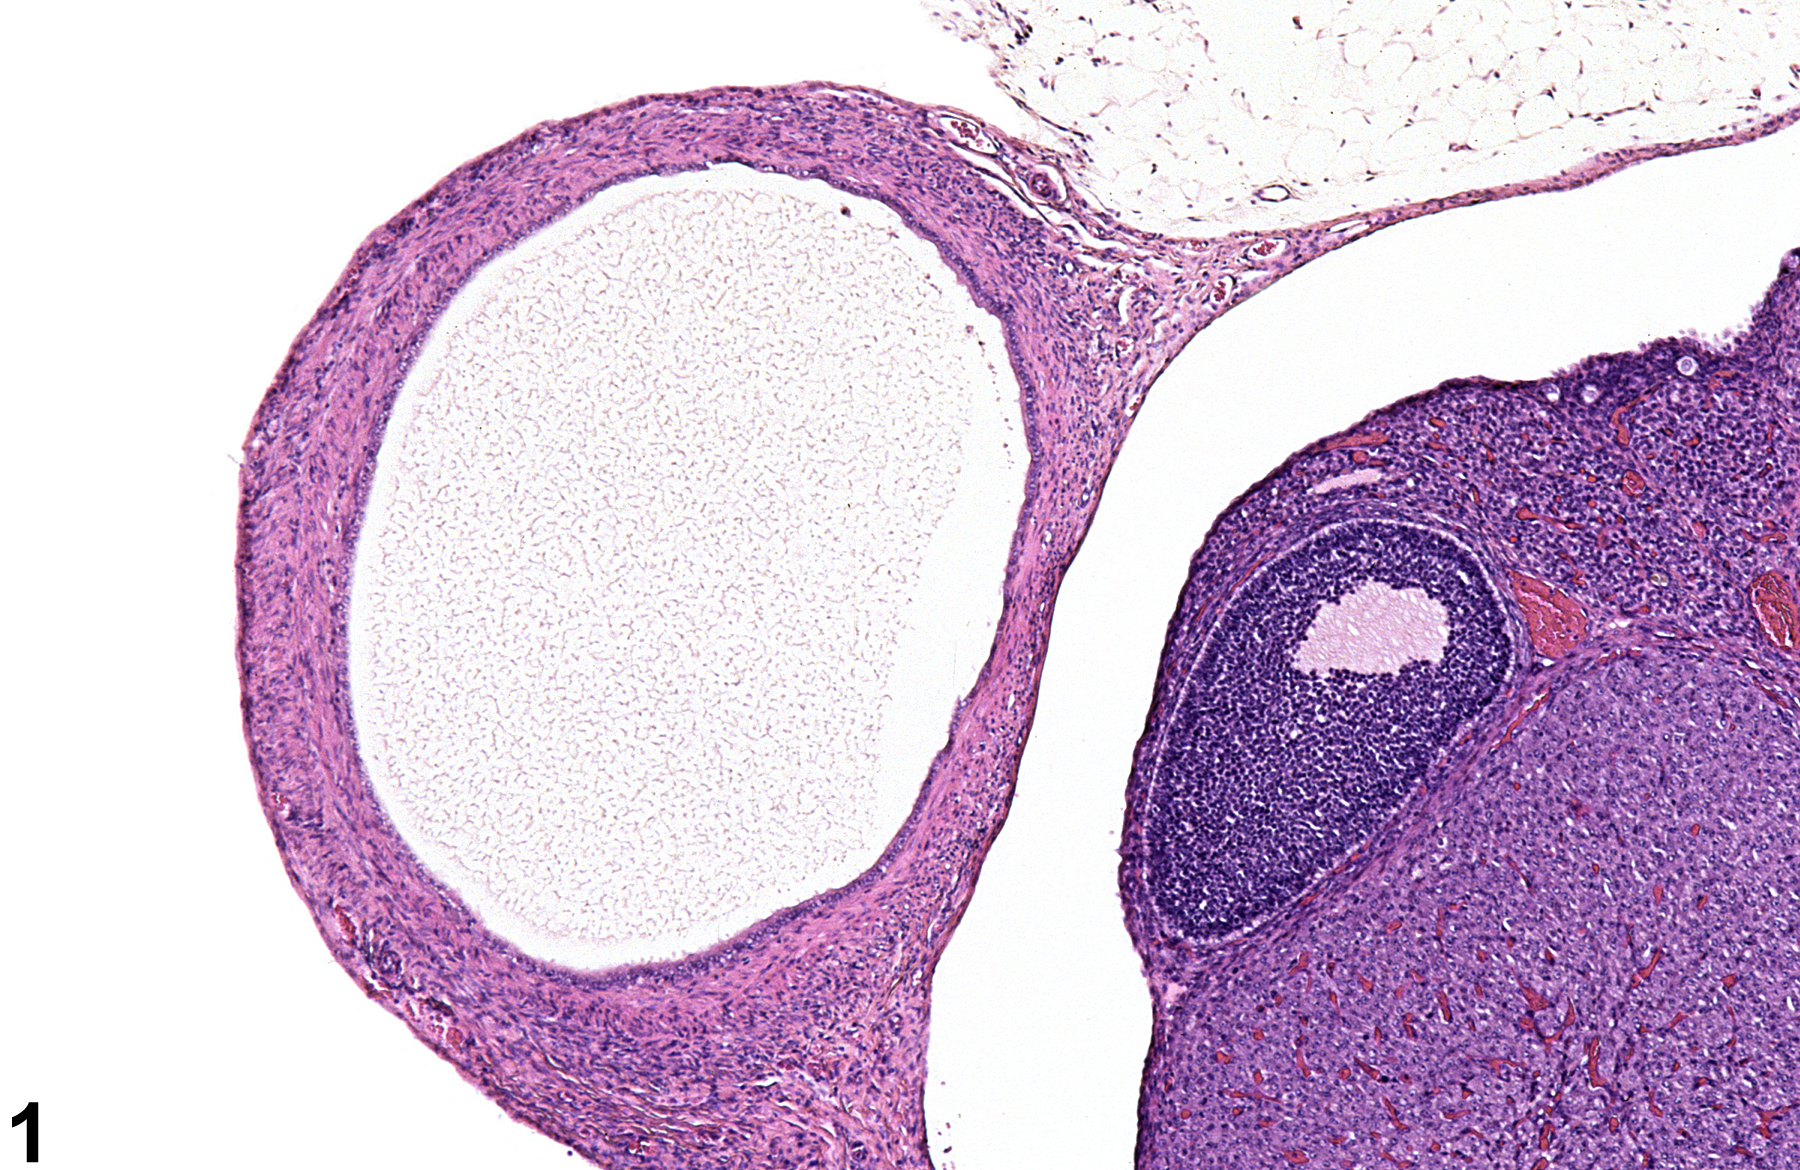 Image of cyst (paraovarian tissue) in the ovary from a female F344/N rat in a subchronic study